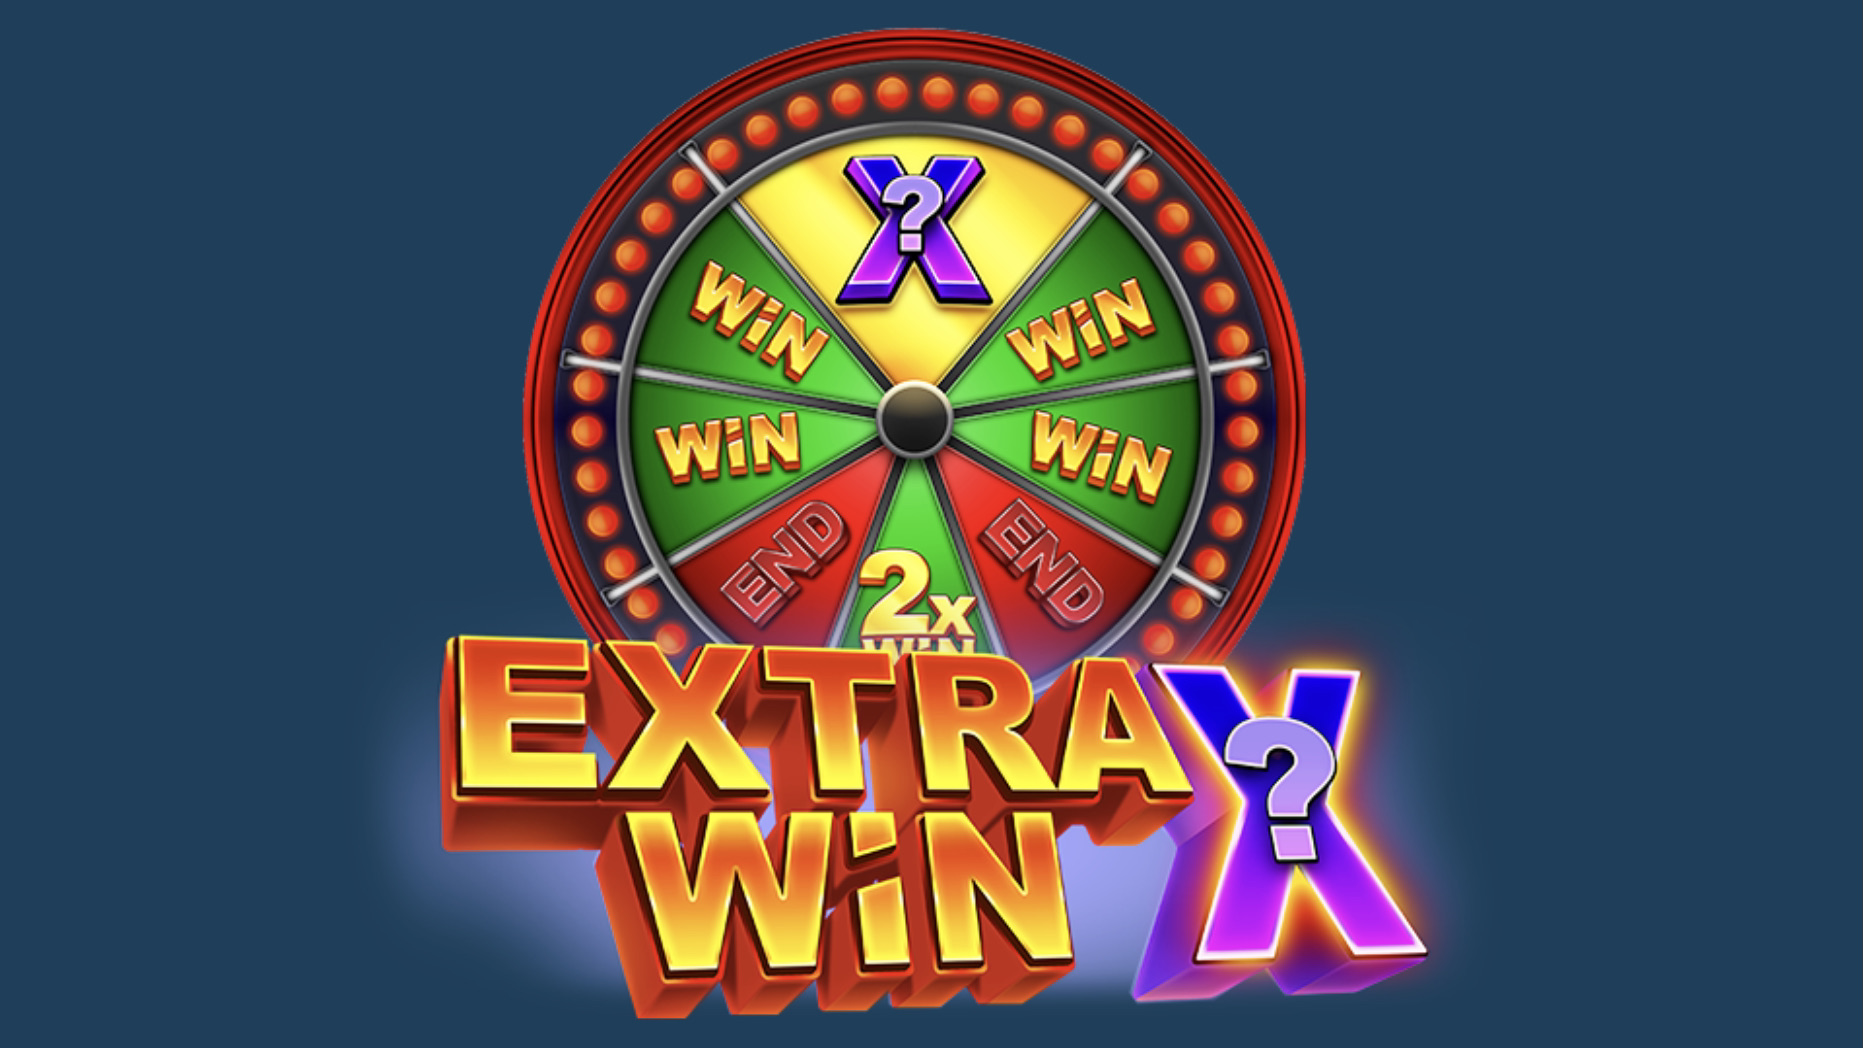 Extra Win X is a 3x3, five-payline slot that comes with a bonus wheel mechanic with the potential to increase players’ wins by up to x800